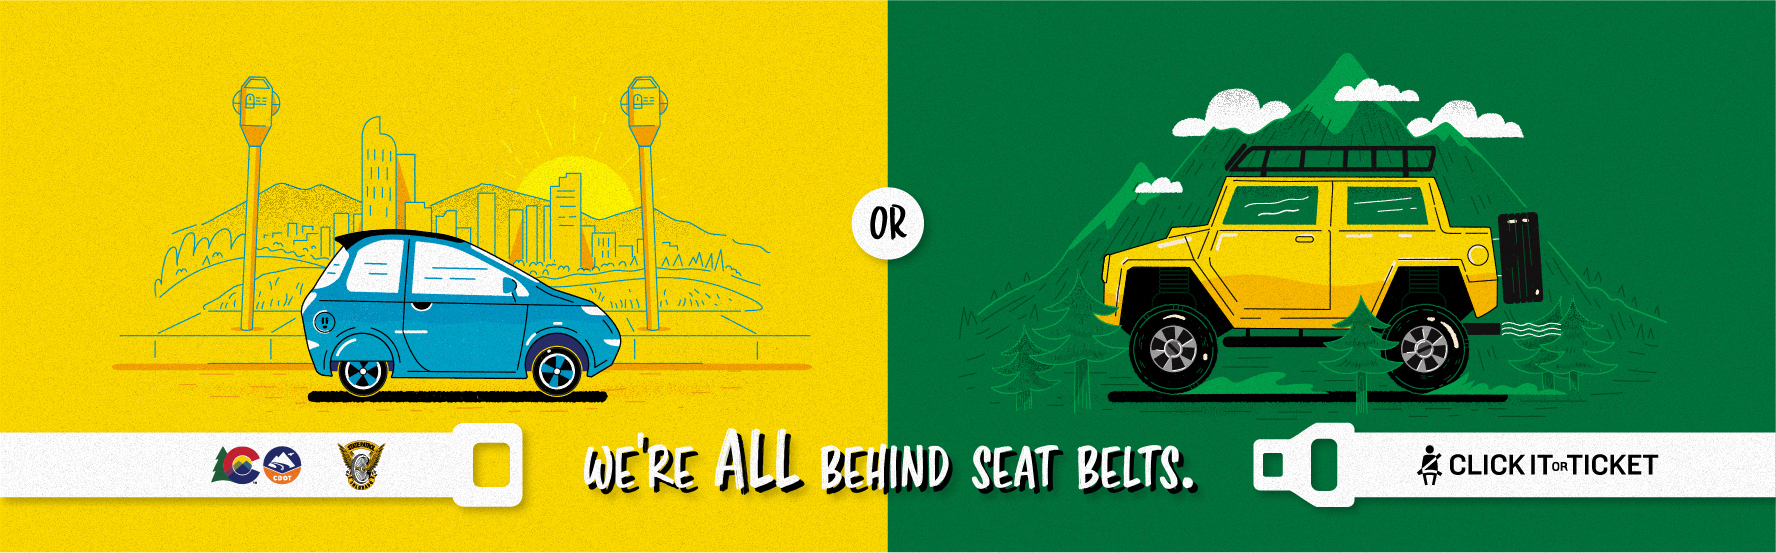 A Common Bond, Electric vehicle or SUV, We're ALL behind seat belts 